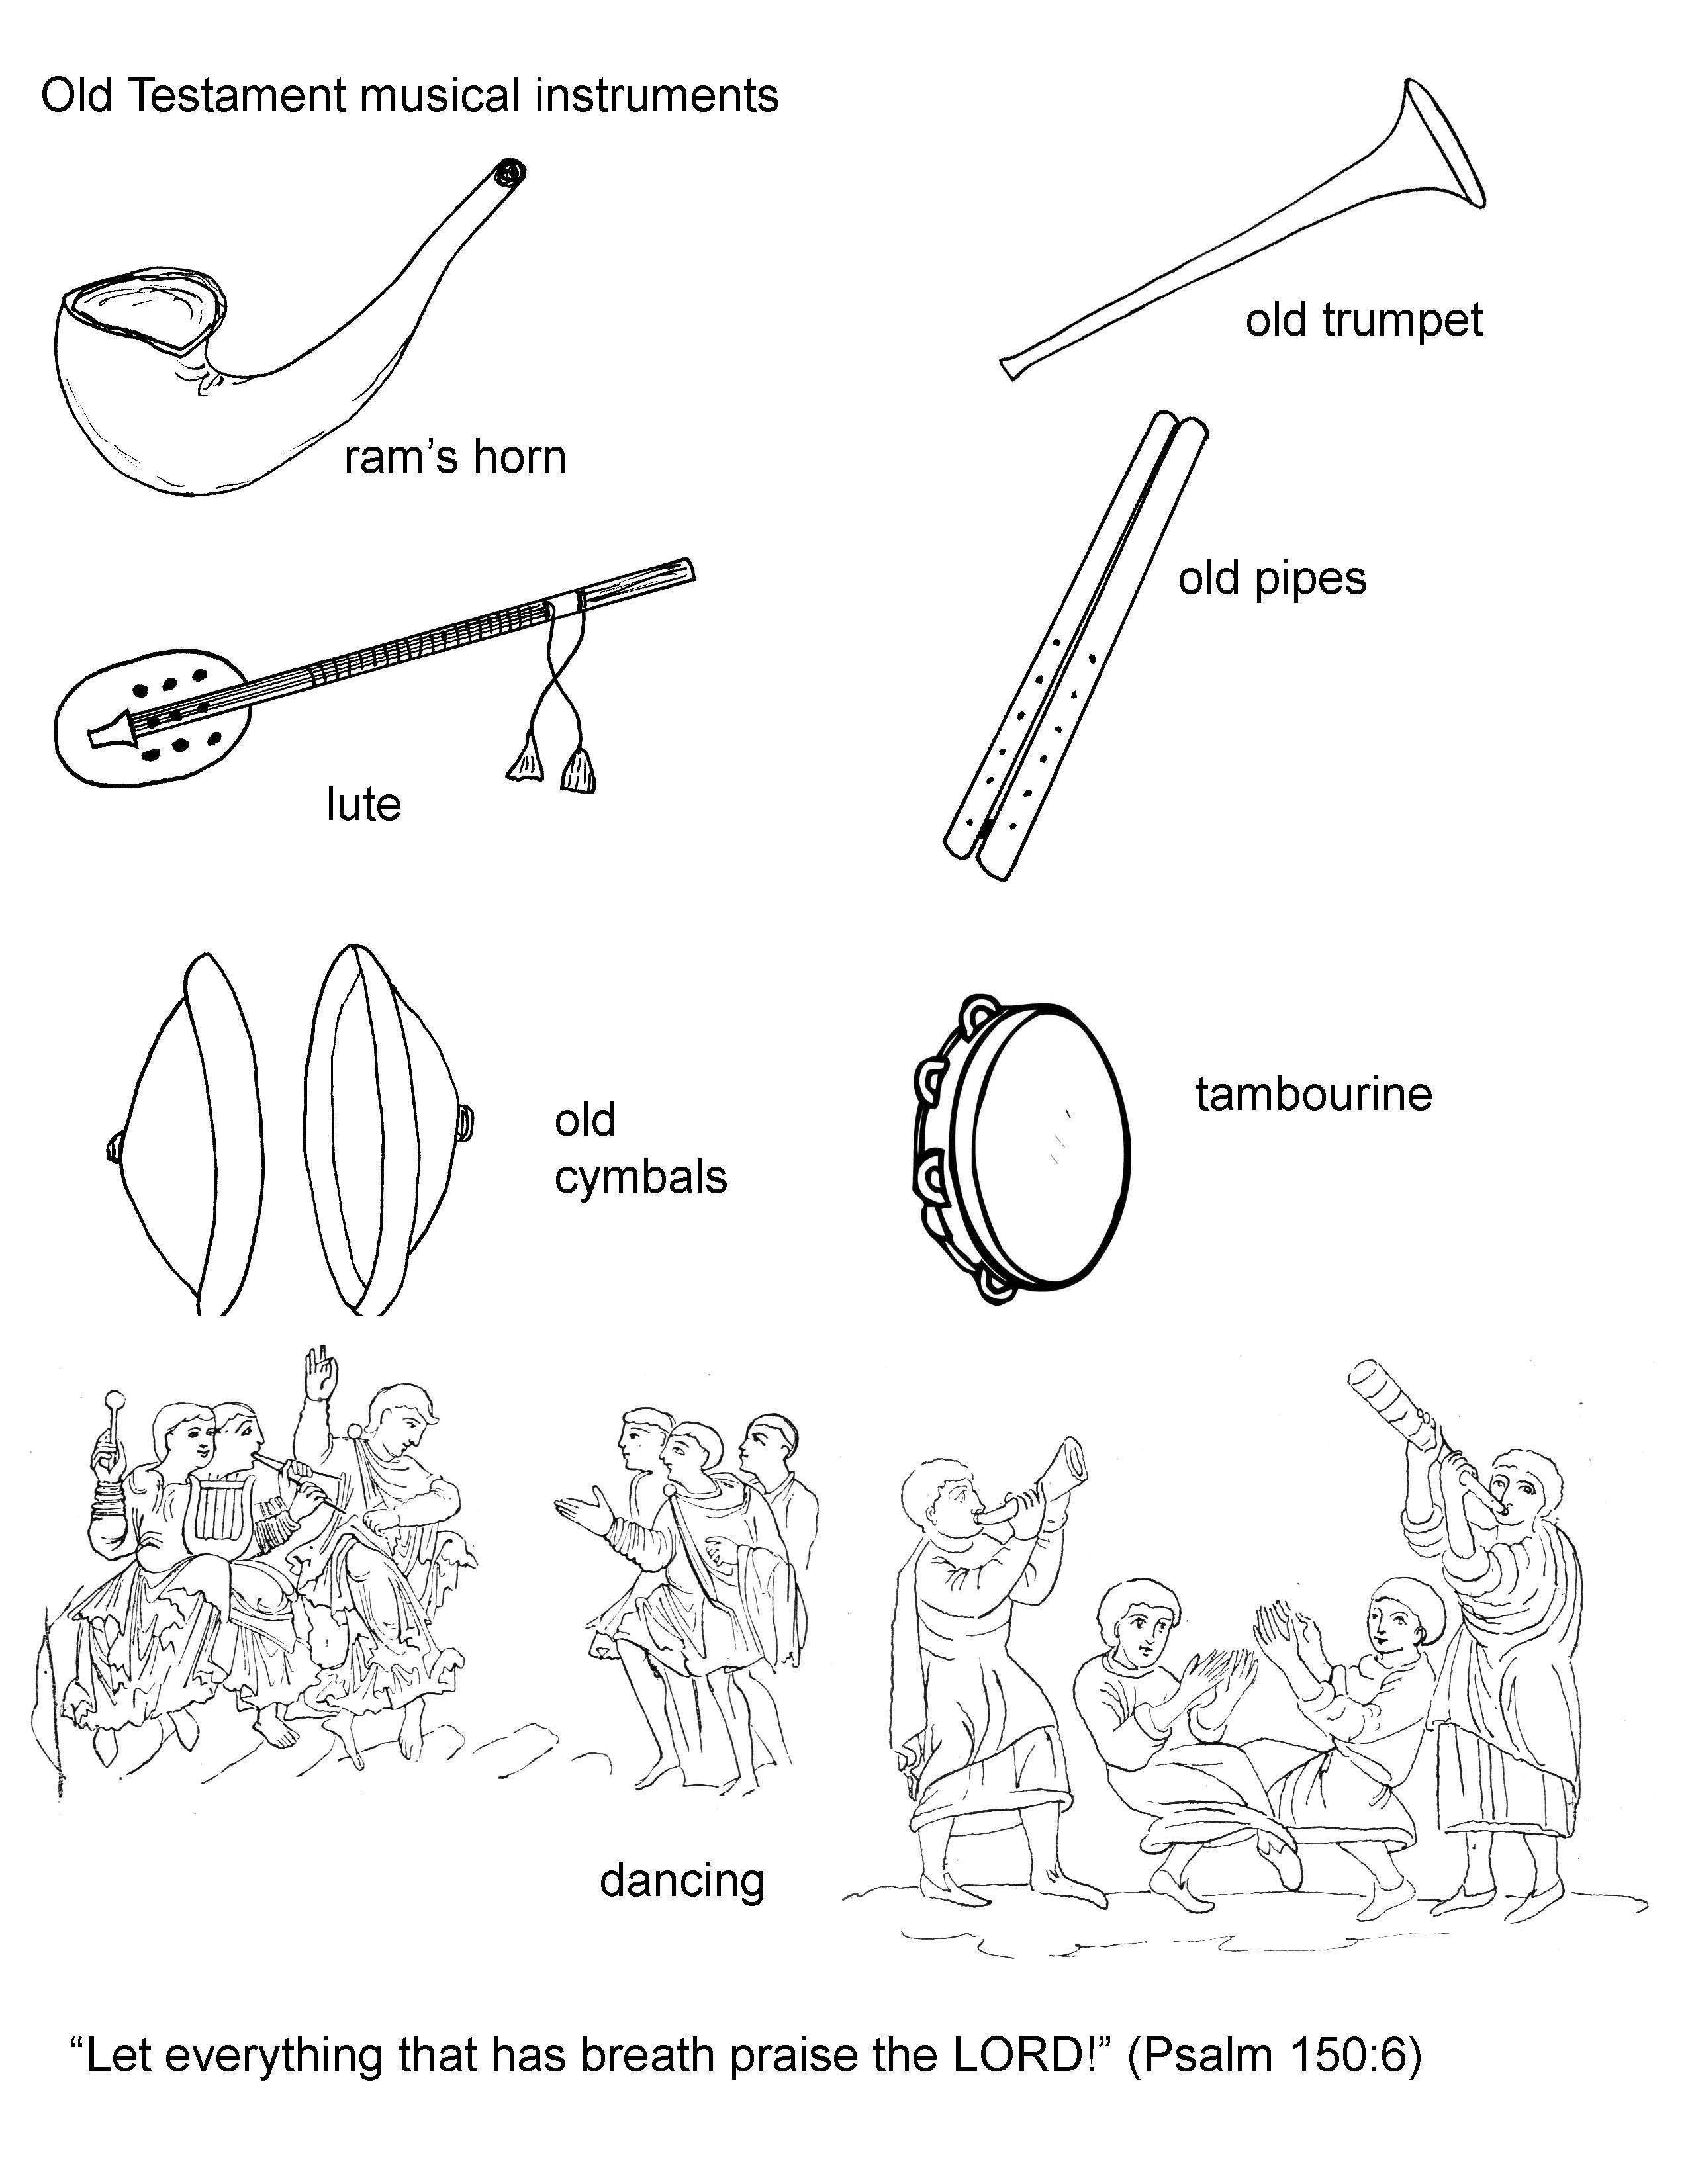 Coloring Musical instruments in English. Category English. Tags:  English.